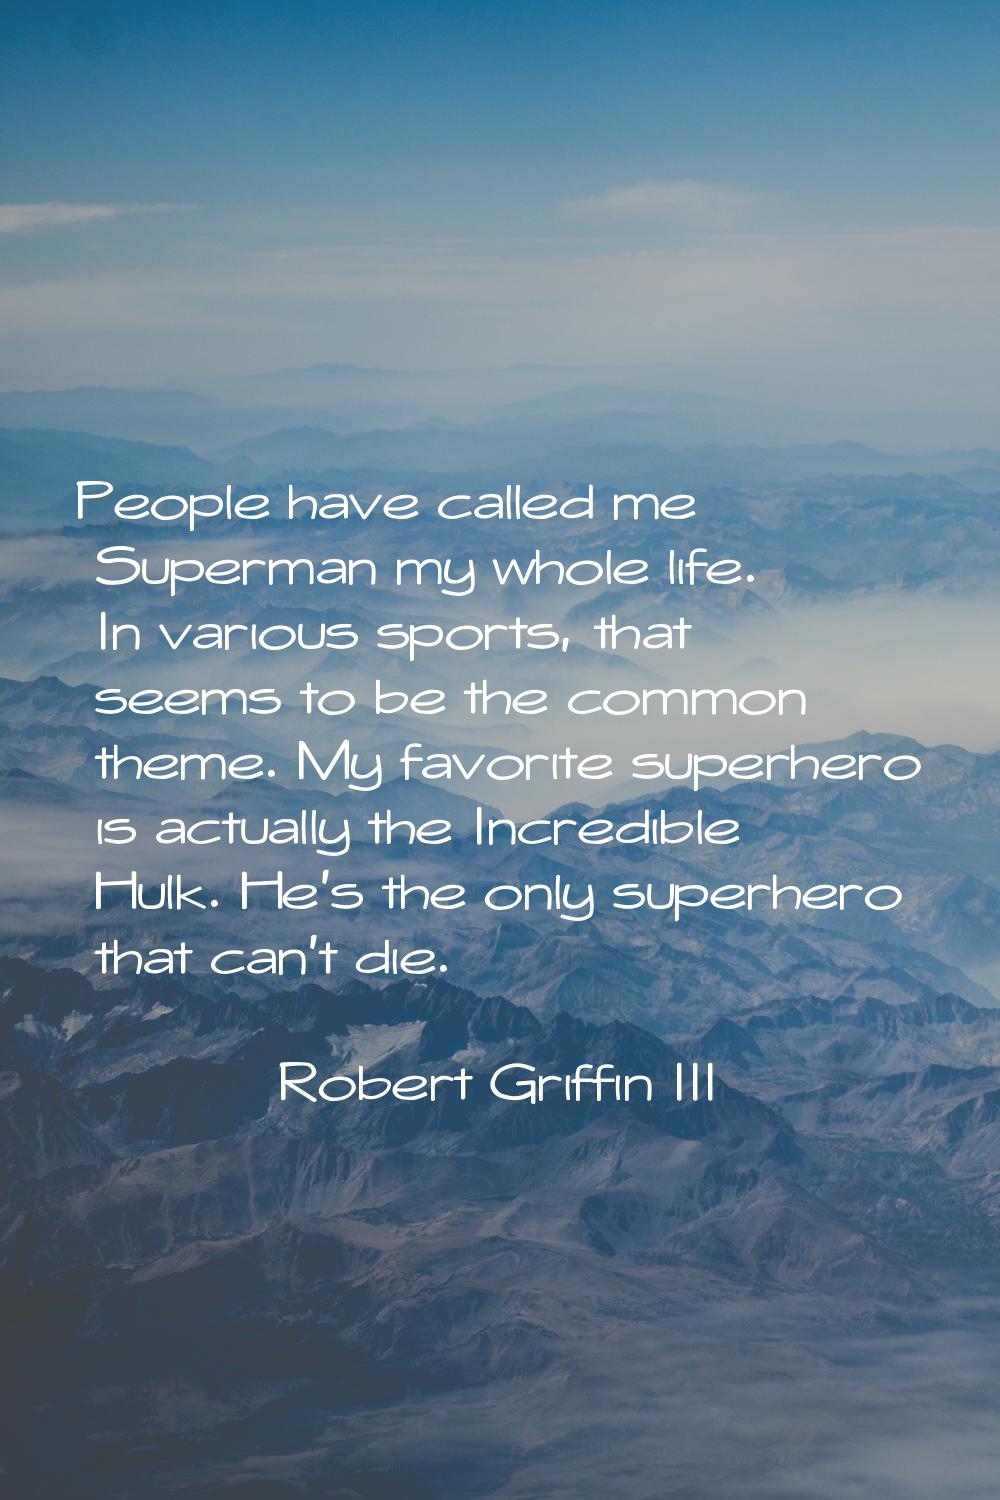 People have called me Superman my whole life. In various sports, that seems to be the common theme.